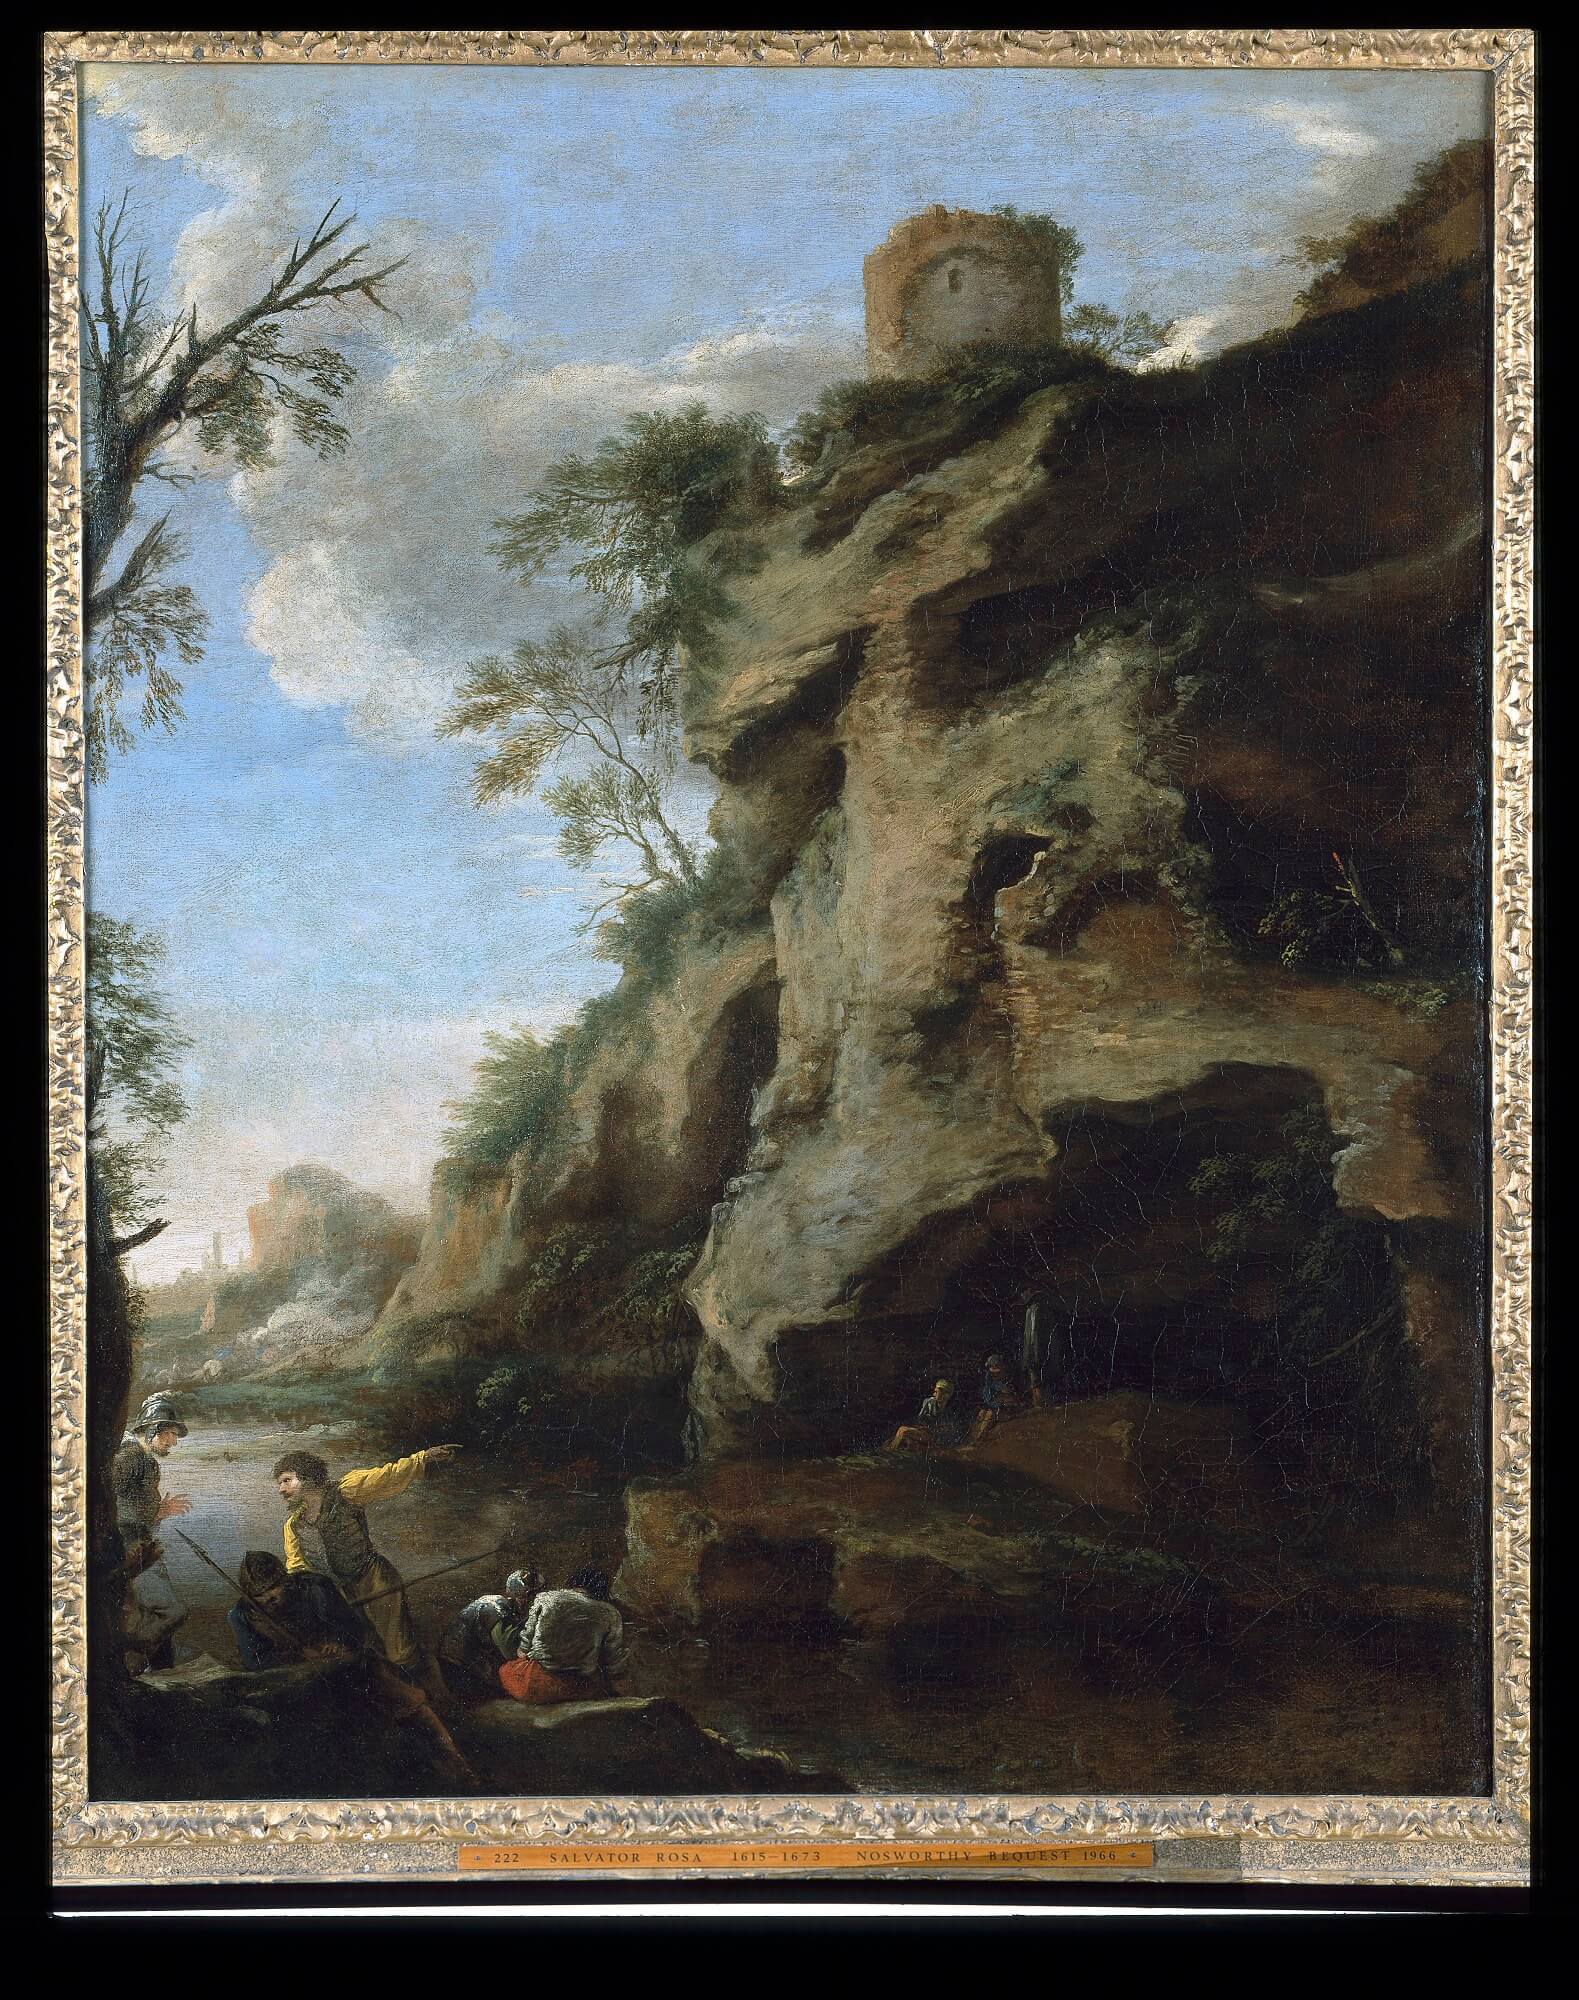 20-03-15-salvator-rosa-a-rocky-coast-with-soldiers-studying-a-plan-late-1640s---full-size (1)